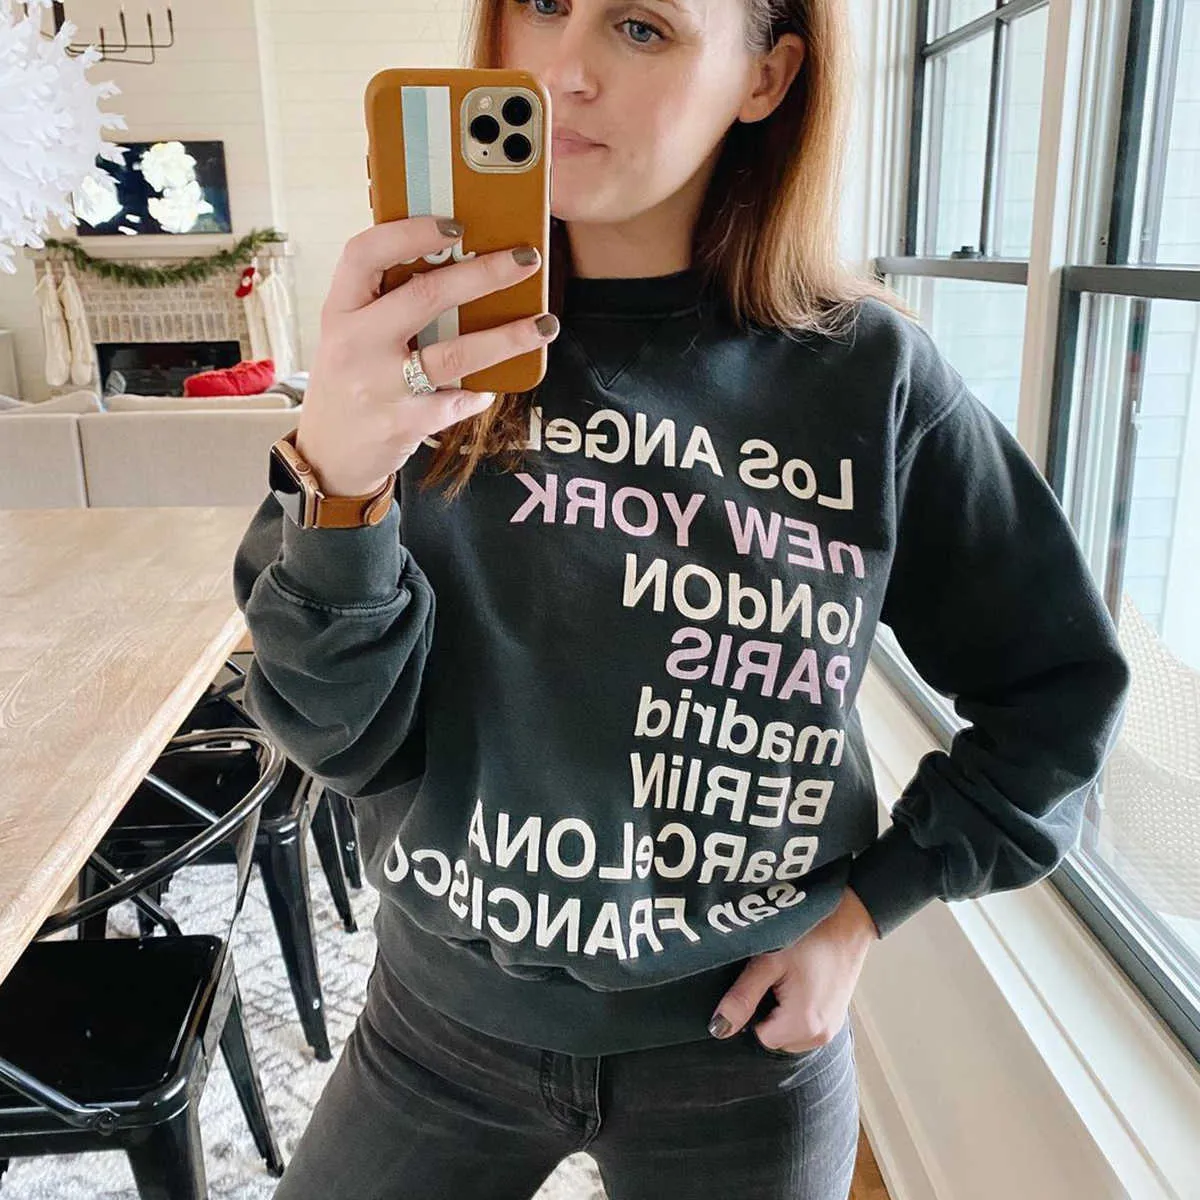 Faded Thick Letter Print Sweatshirt Women Autumn Winter 100% Cotton Warm Retro Pullover Casual Vintage Oversize Hoodie Tops 2020 X0721